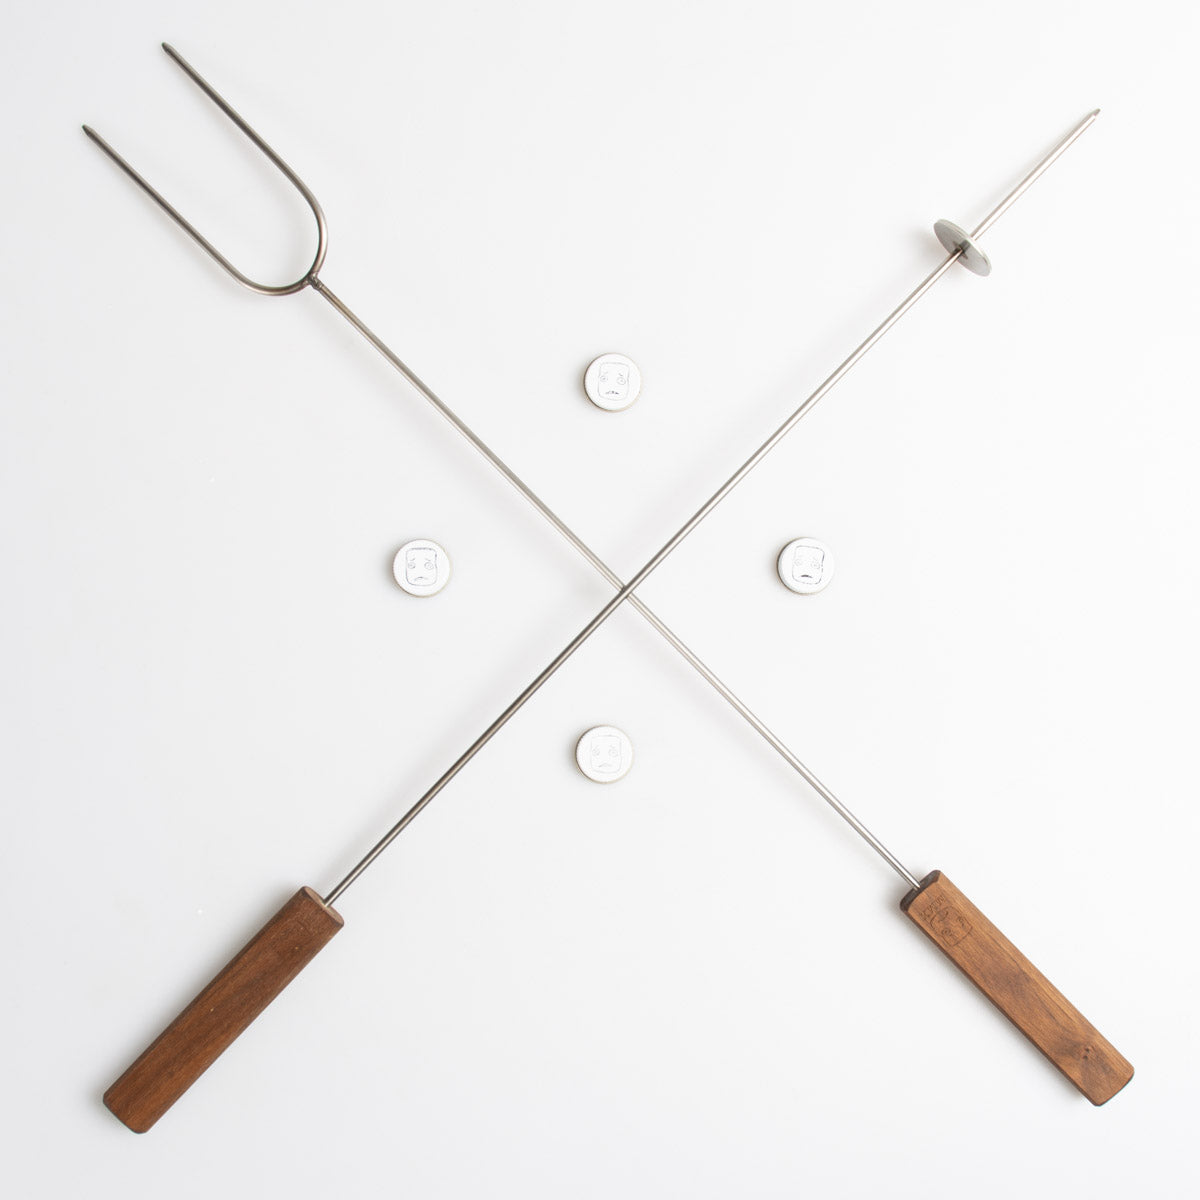 The Social Set, a roasting stick and target set combination for your MMX Marshmallow Crossbow